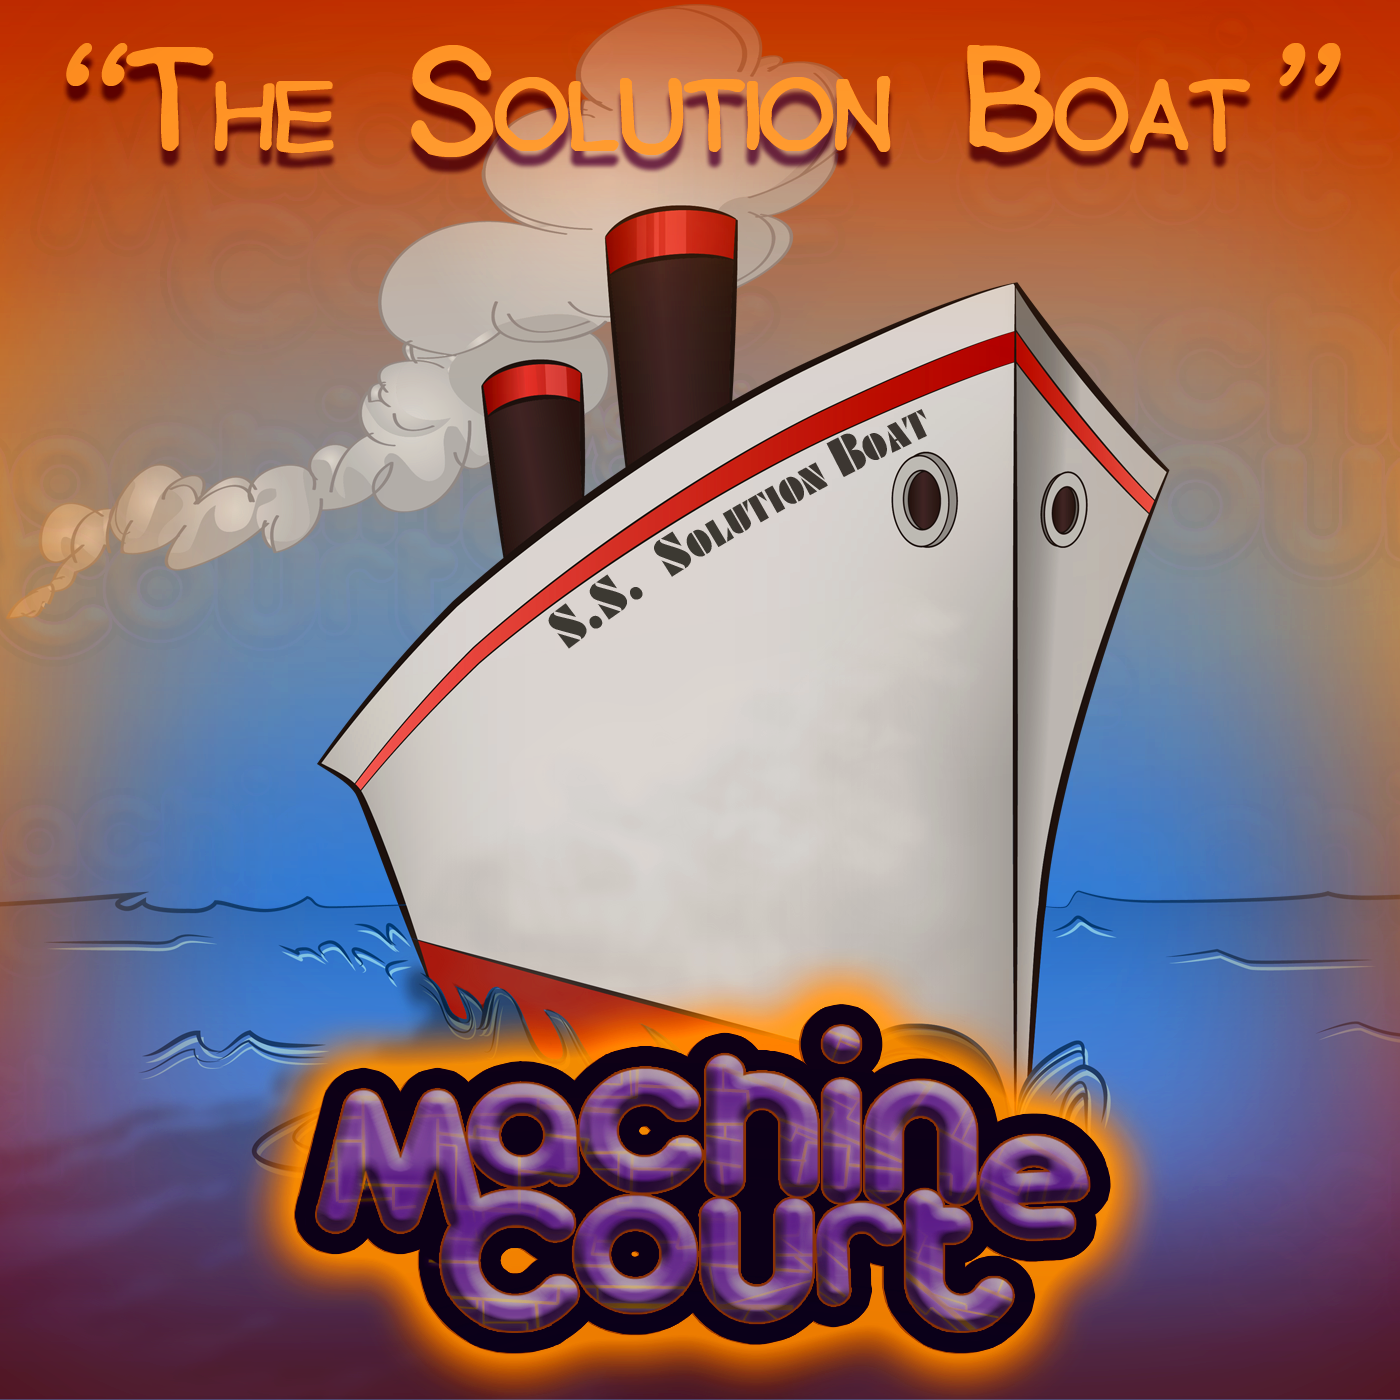 4.07 “The Solution Boat Pt. 1”